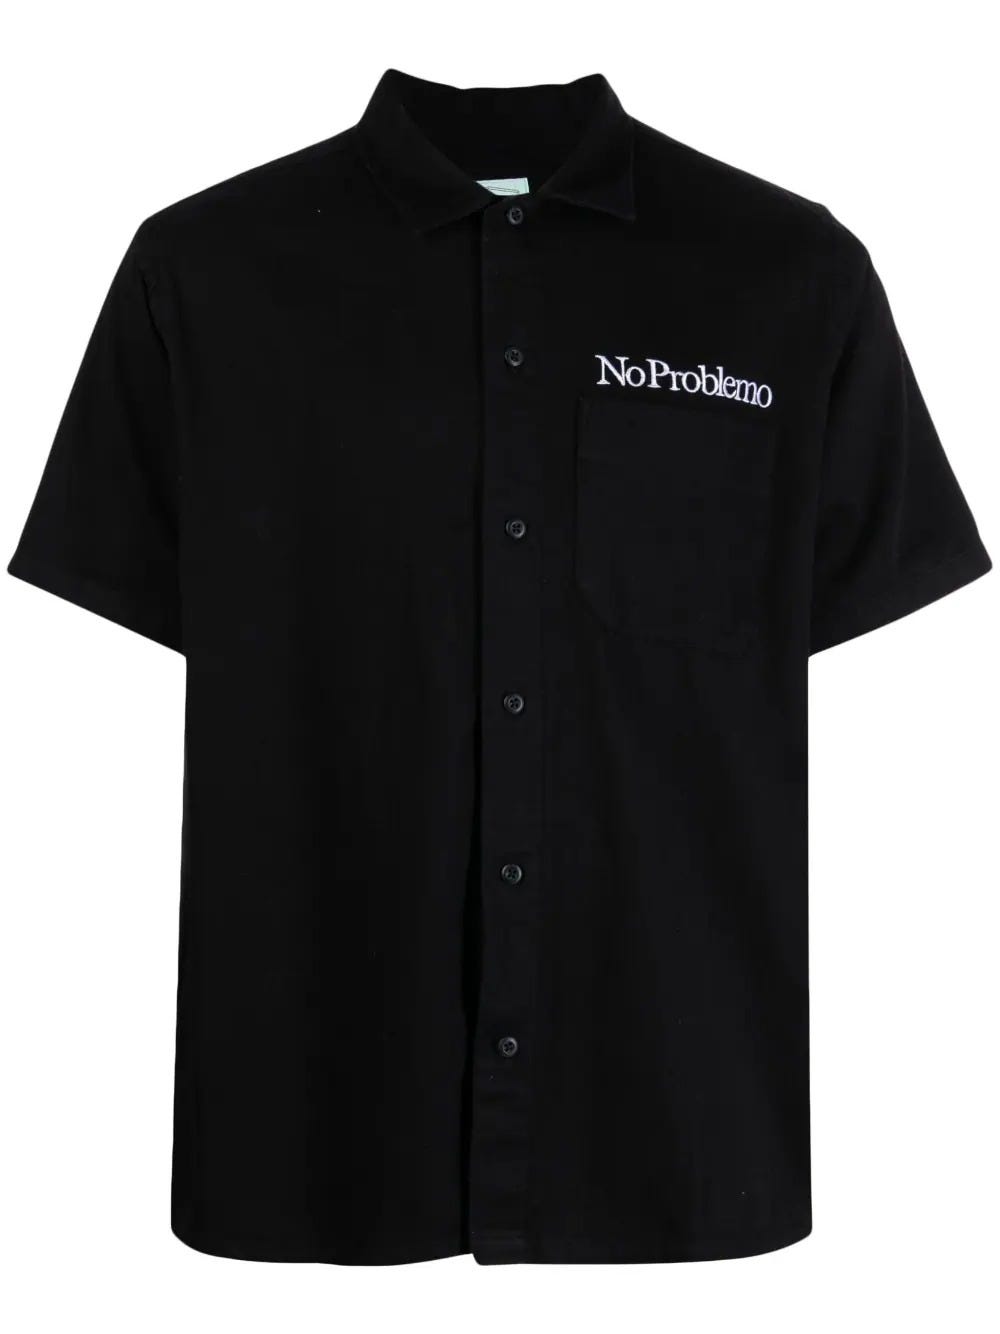 ARIES BLACK SHIRT WITH EMBROIDERY